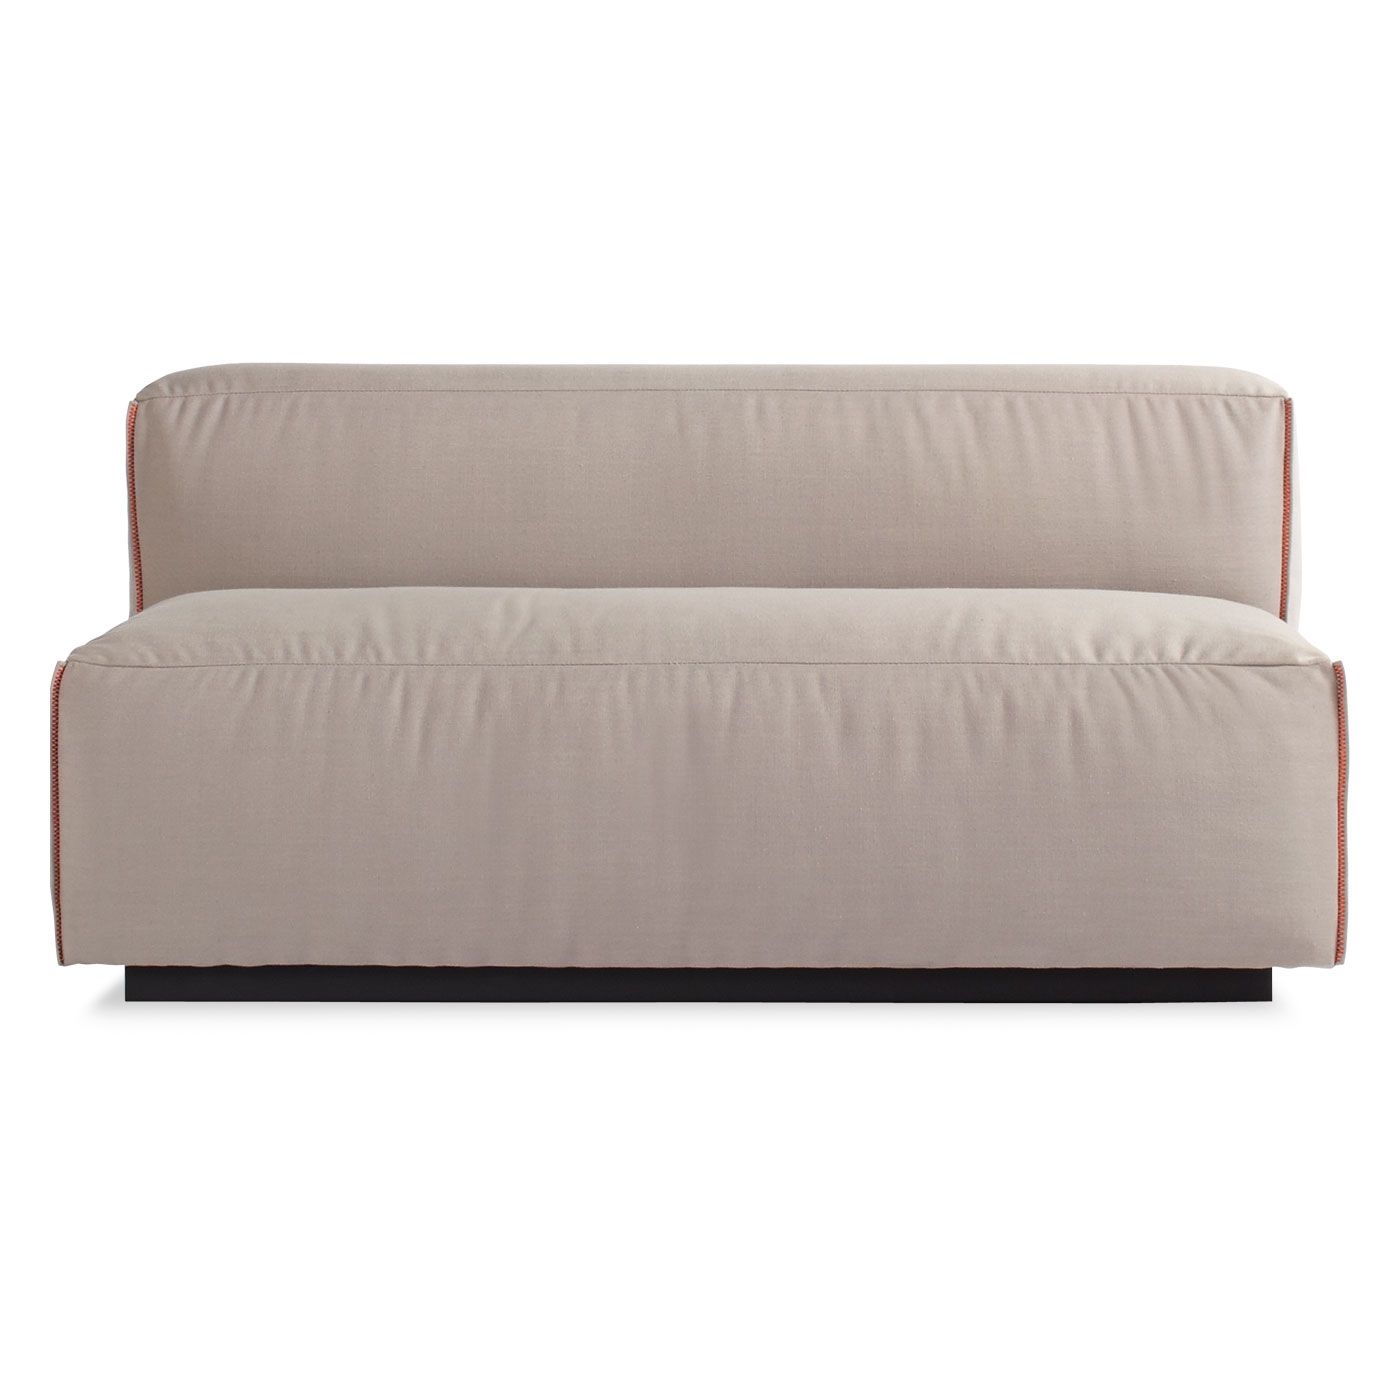 Modular Solid Wood 100% Cotton Two-Seat Unarmed Loveseat